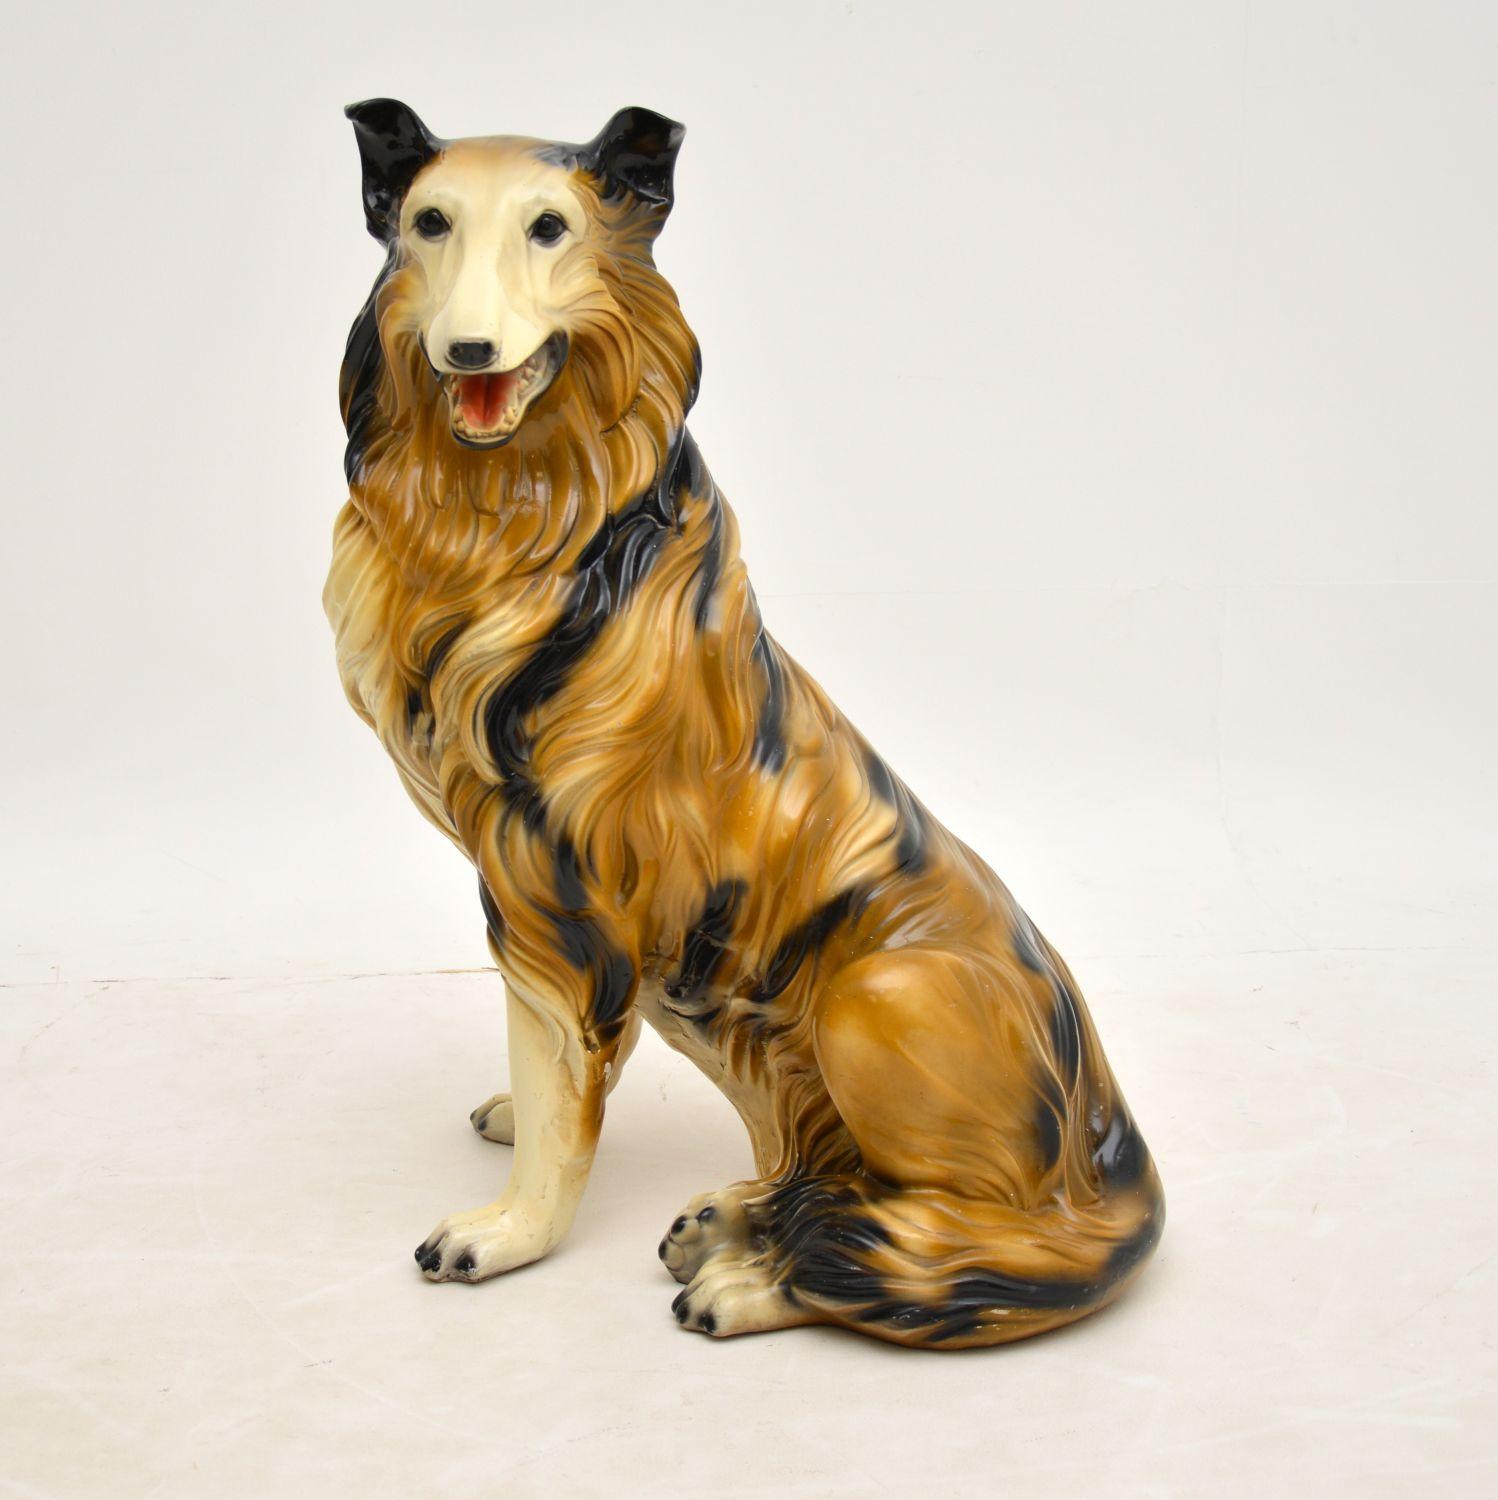 A wonderful vintage ceramic statue of a Rough Collie dog. This was made in England, it dates from the 1960-70’s.
This is hand painted and is of excellent quality. It is life sized and is a fabulous decorative piece.

The condition is fantastic